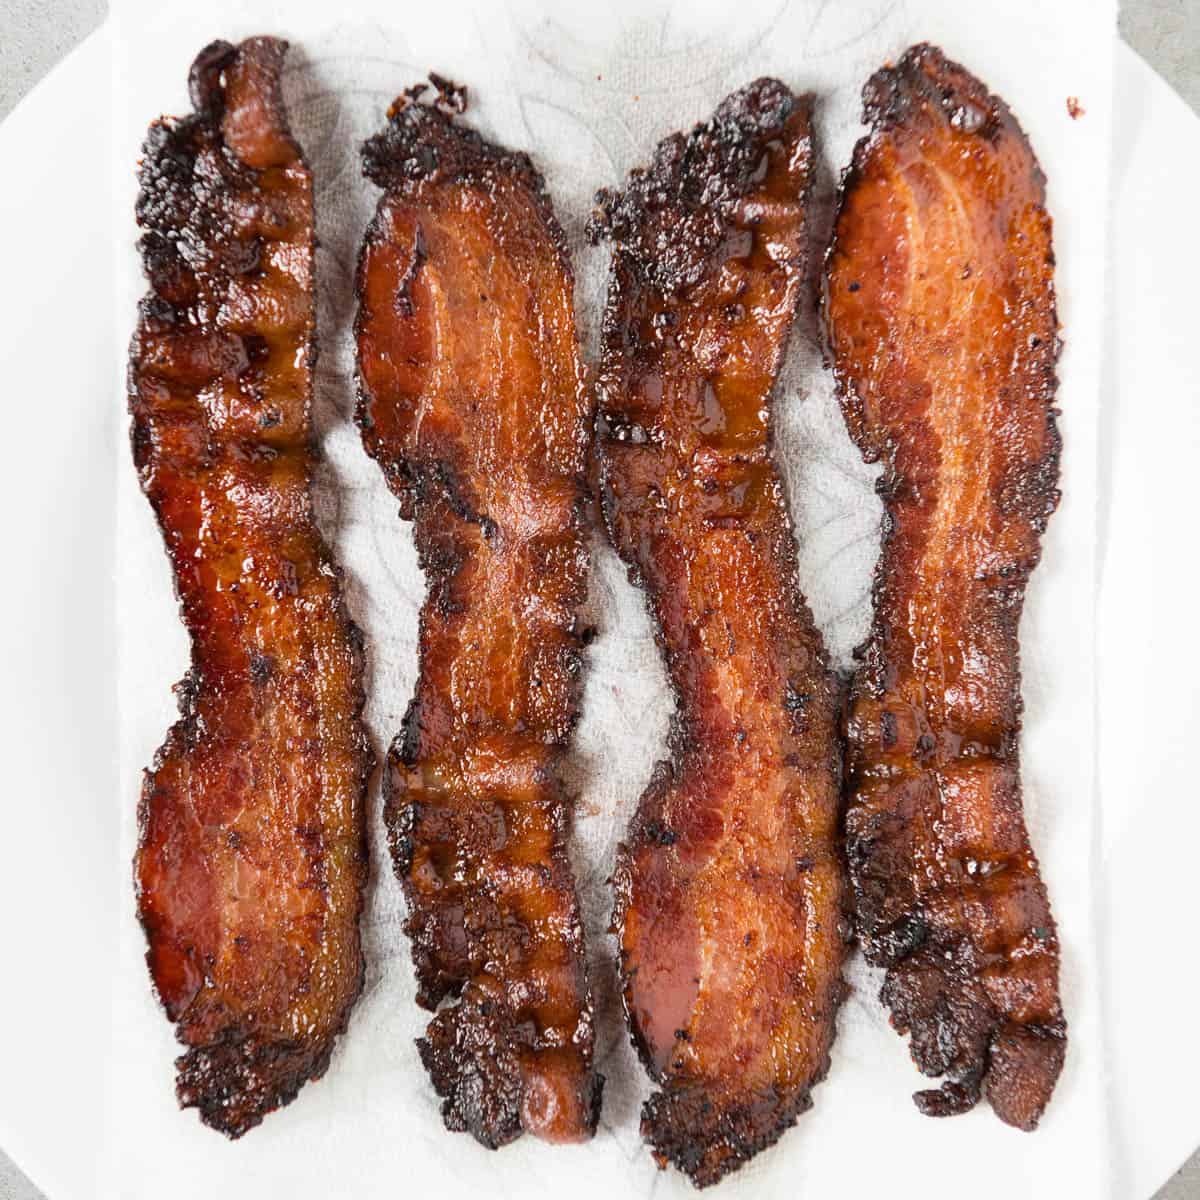 How to Cook Bacon in the Oven (and Avoid All That Greasy Splatter)